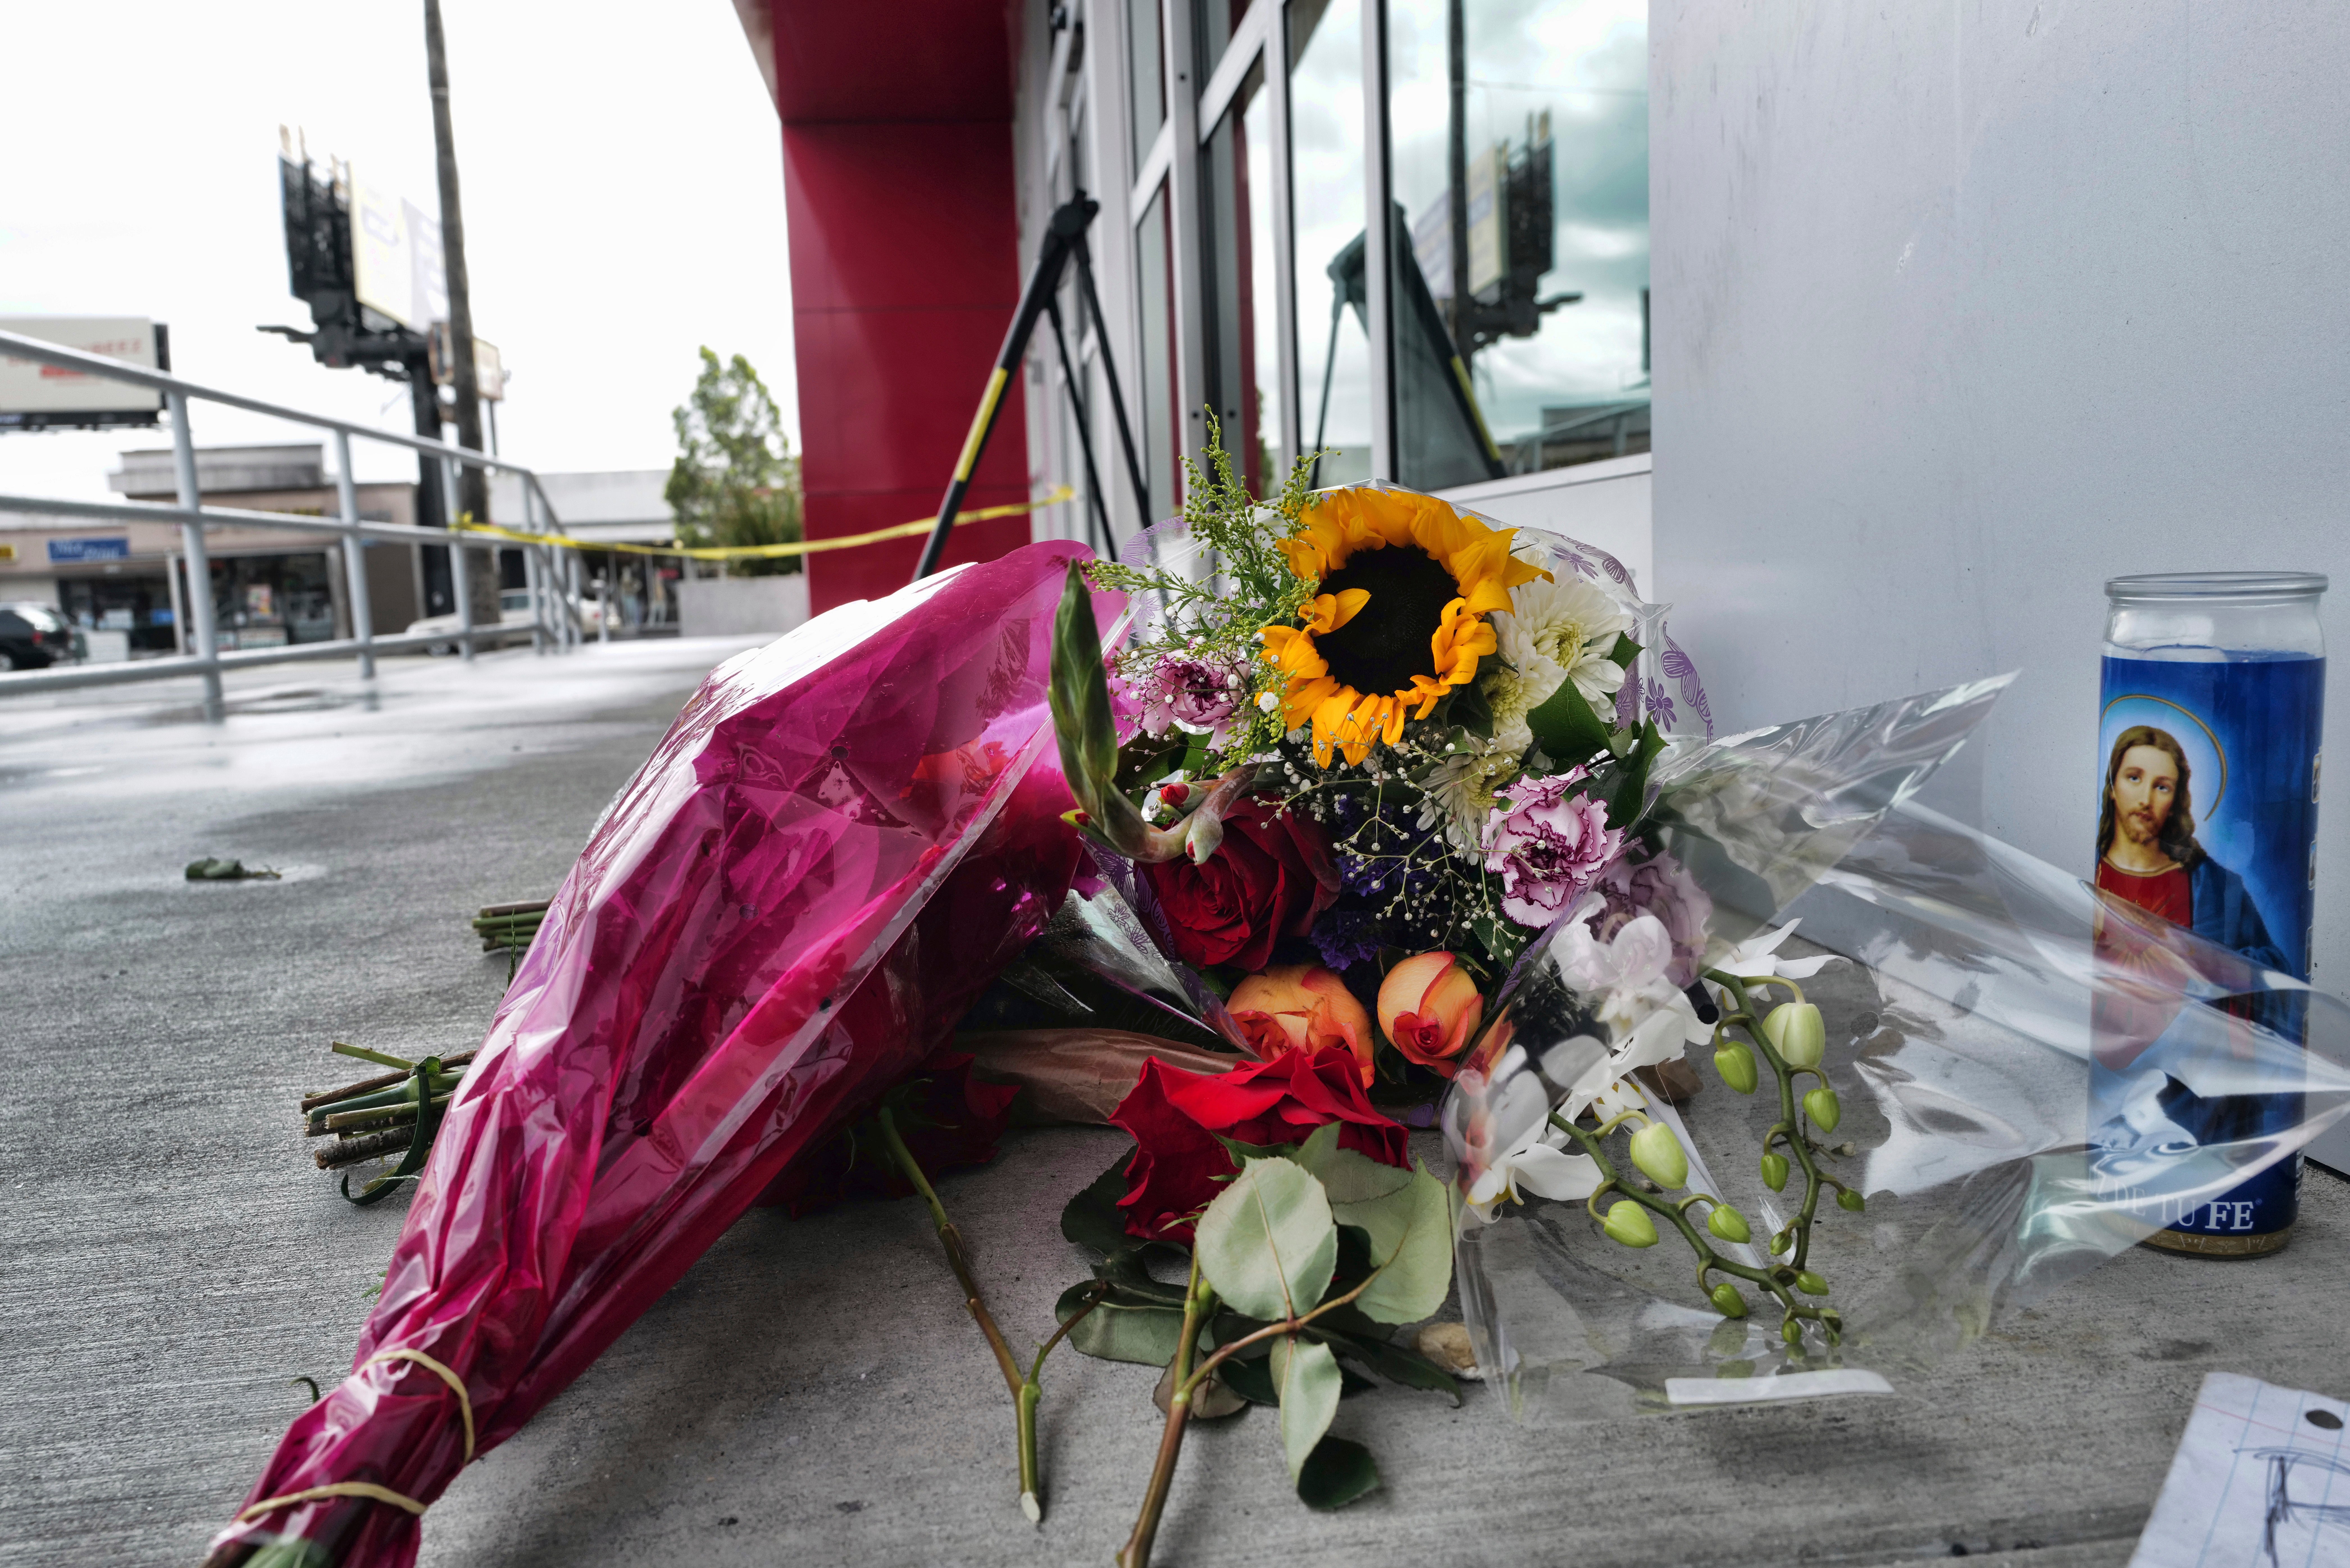 A votive candle and flowers are left for the teen who was fatally shot at a department store in North Hollywood section last week